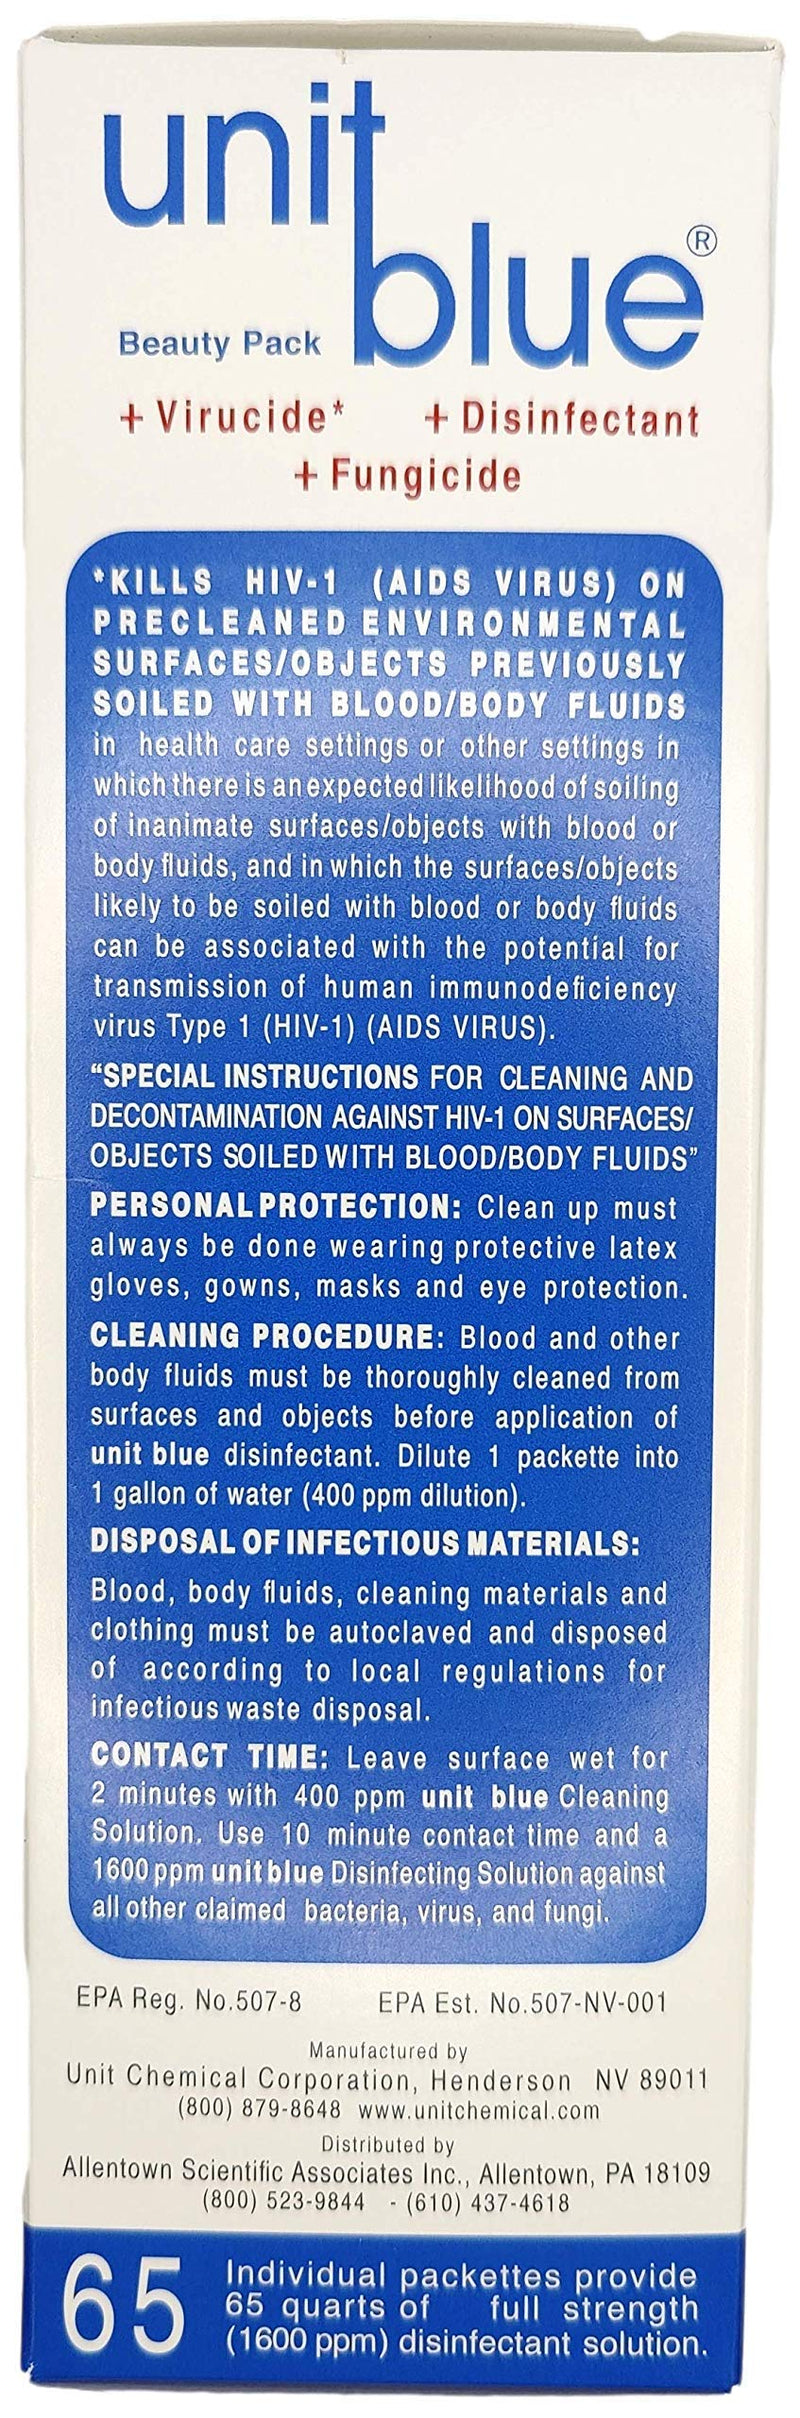 [Australia - AusPower] - Unit Blue Disinfectant Concentrate | Anti-Rust Formula | Perfect for Combs, Brushes, Scissors, Razors and more | 65 Sachets Make 65 Quarts of Solution | Virucide, Fungicide and Disinfectant 